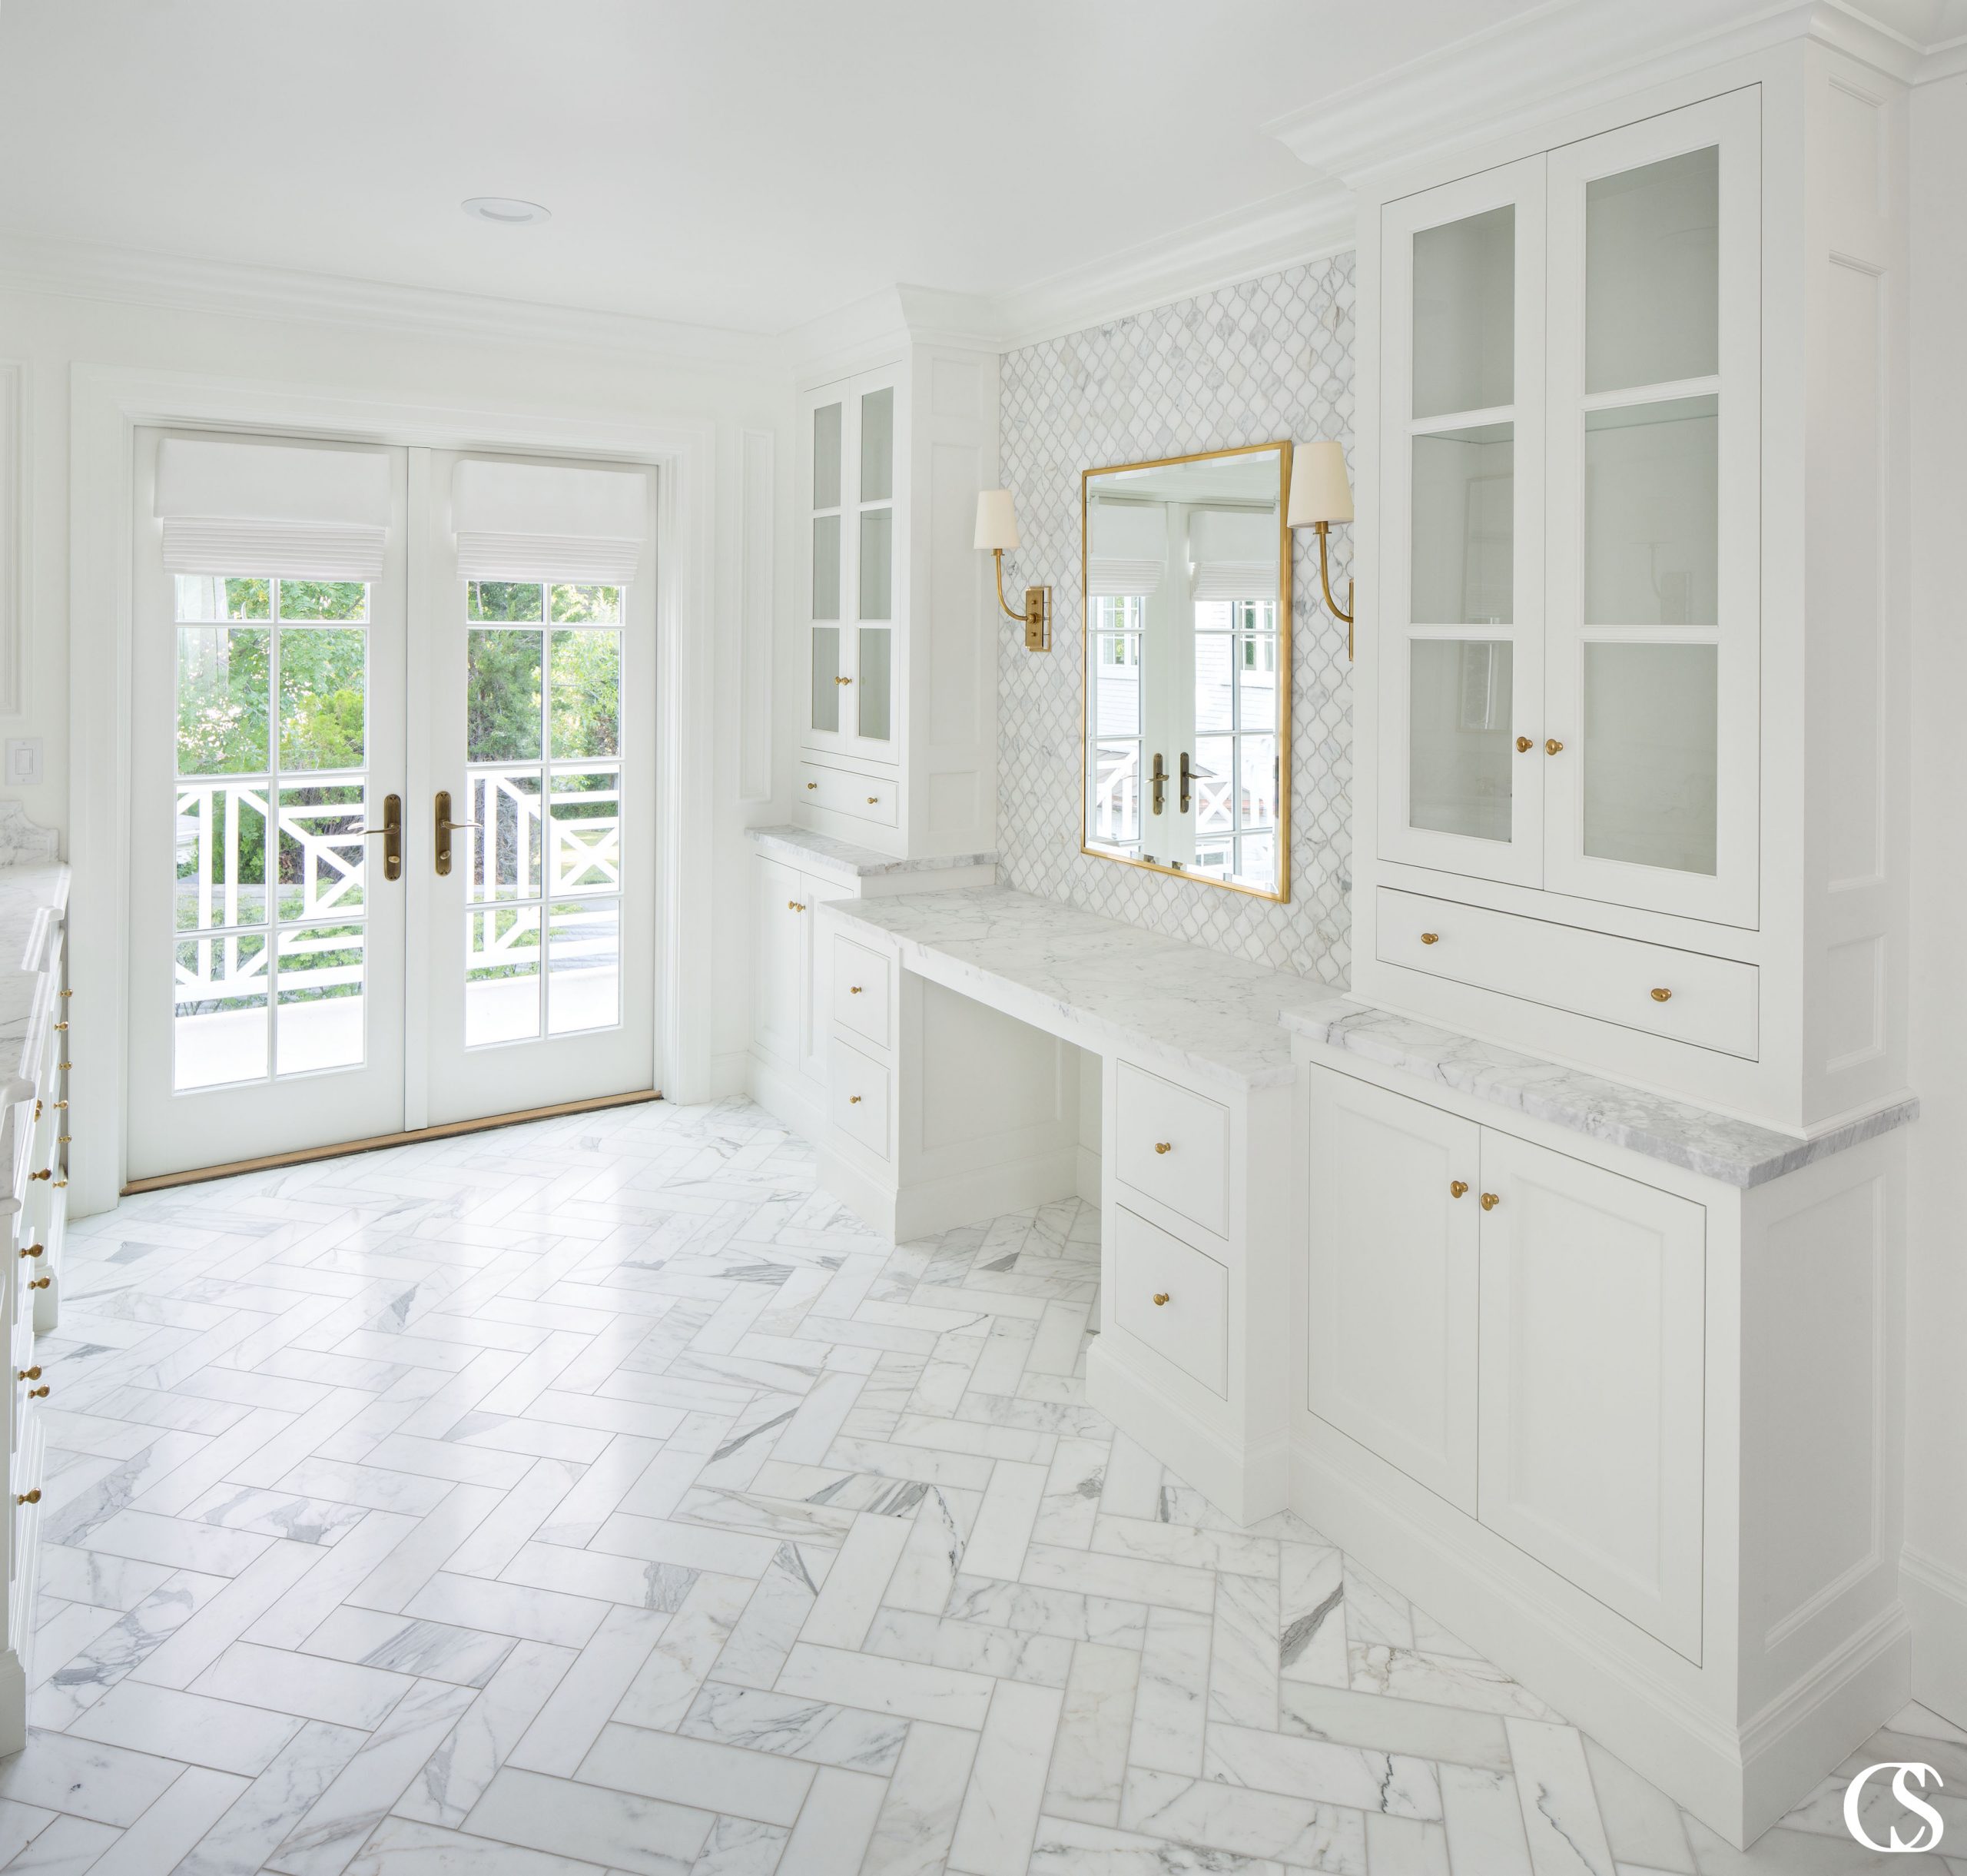 Every angle of this custom bathroom cabinet design is meticulously thought out—like putting the vanity where you can receive the best natural light while getting ready.